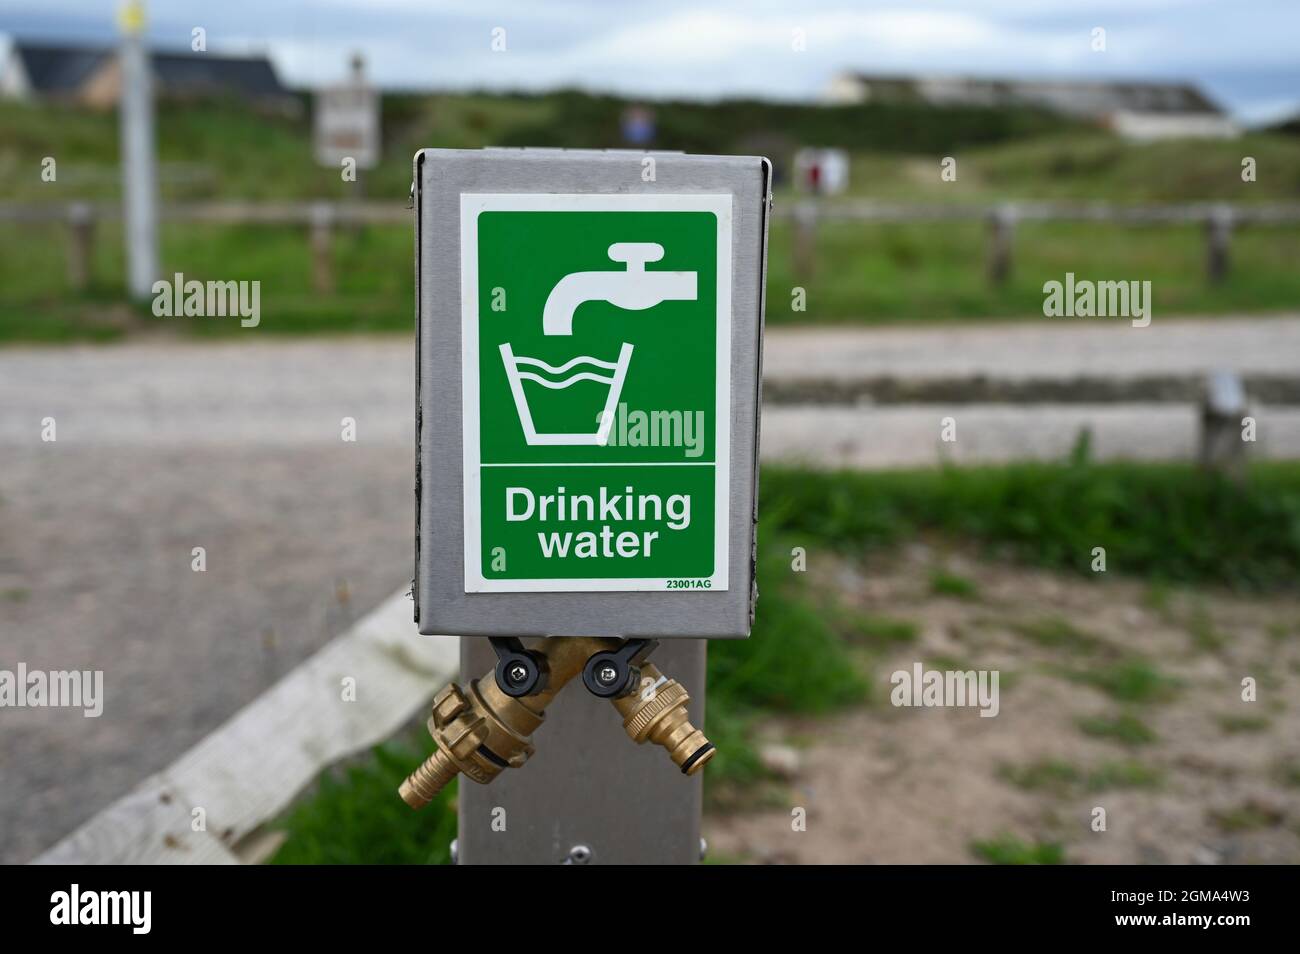 Drinking water sign with icon and two taps below. On metal post. Blurred background of road and grass. Stock Photo